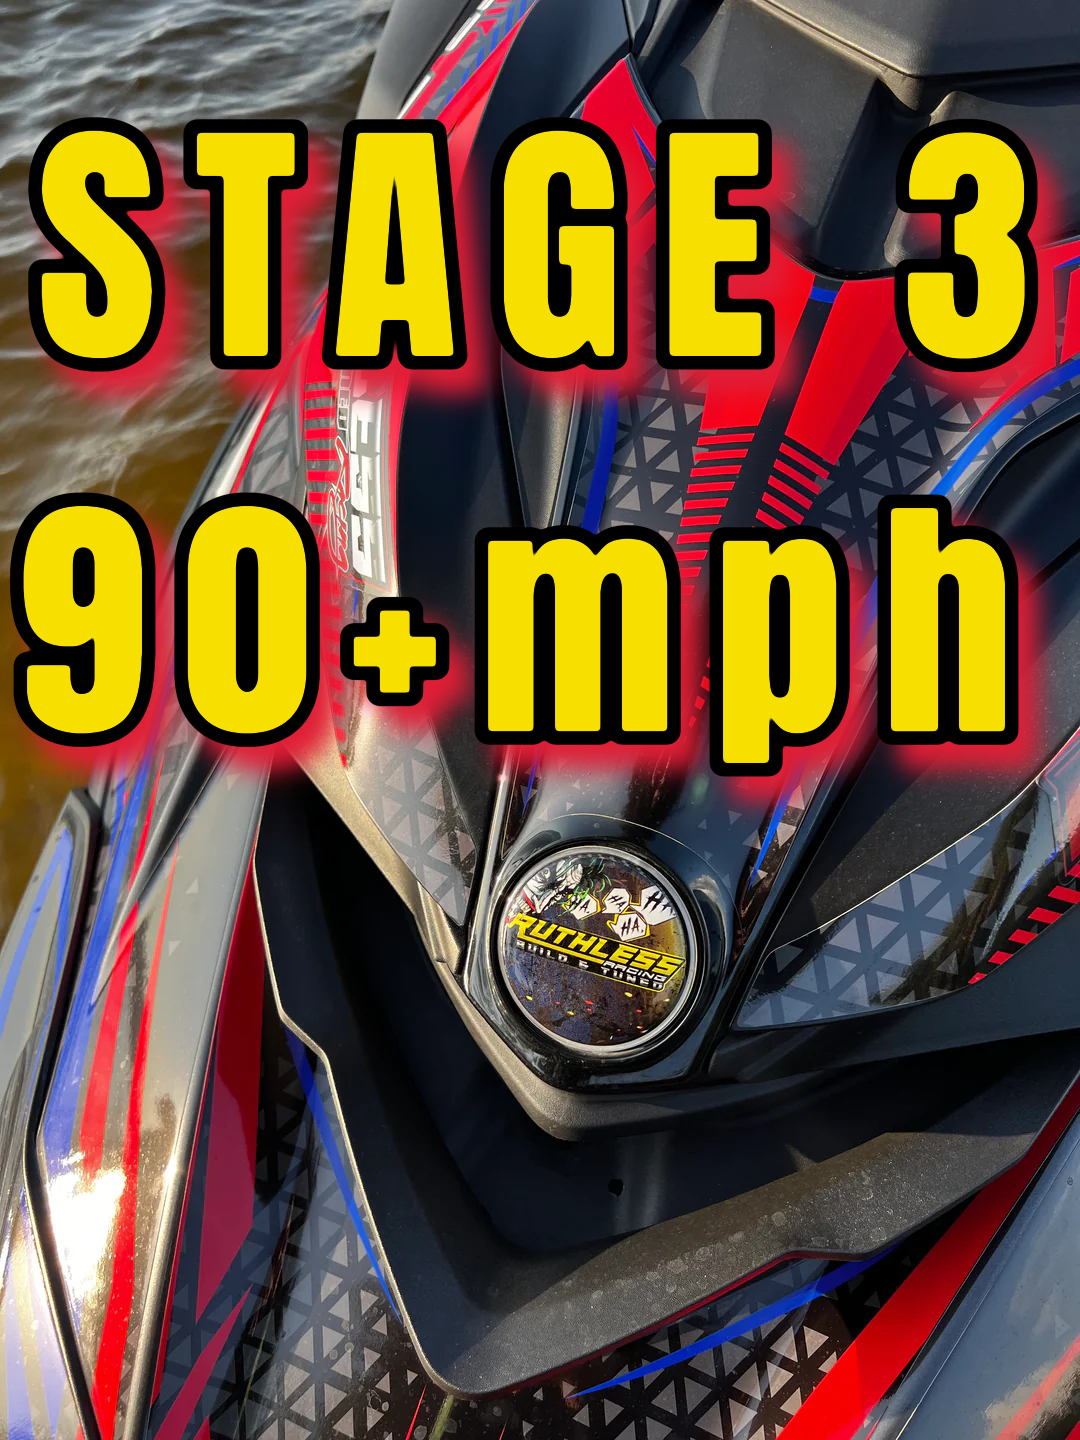 RUTHLESS STAGE 3 90+MPH KIT for 300 Model RXPX & RXTX